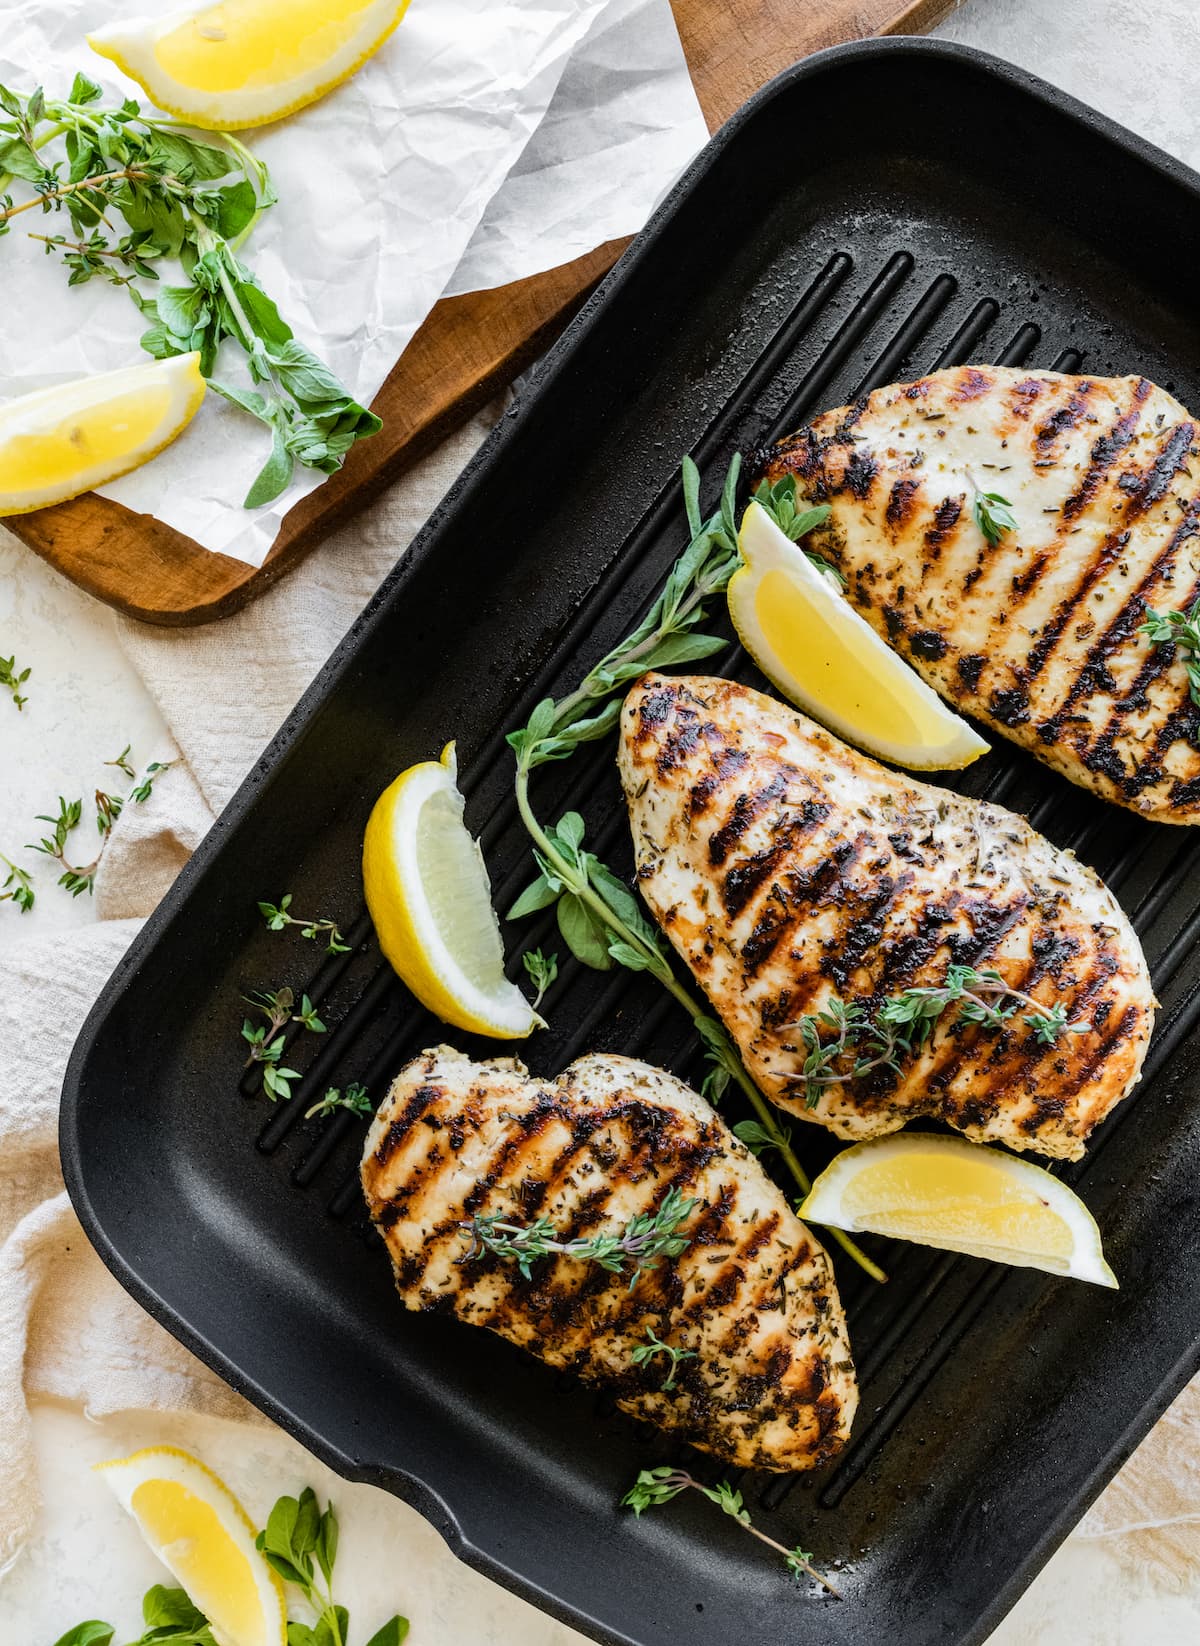 Three grilled chicken breasts in a grill pan with fresh herbs and lemon slices.